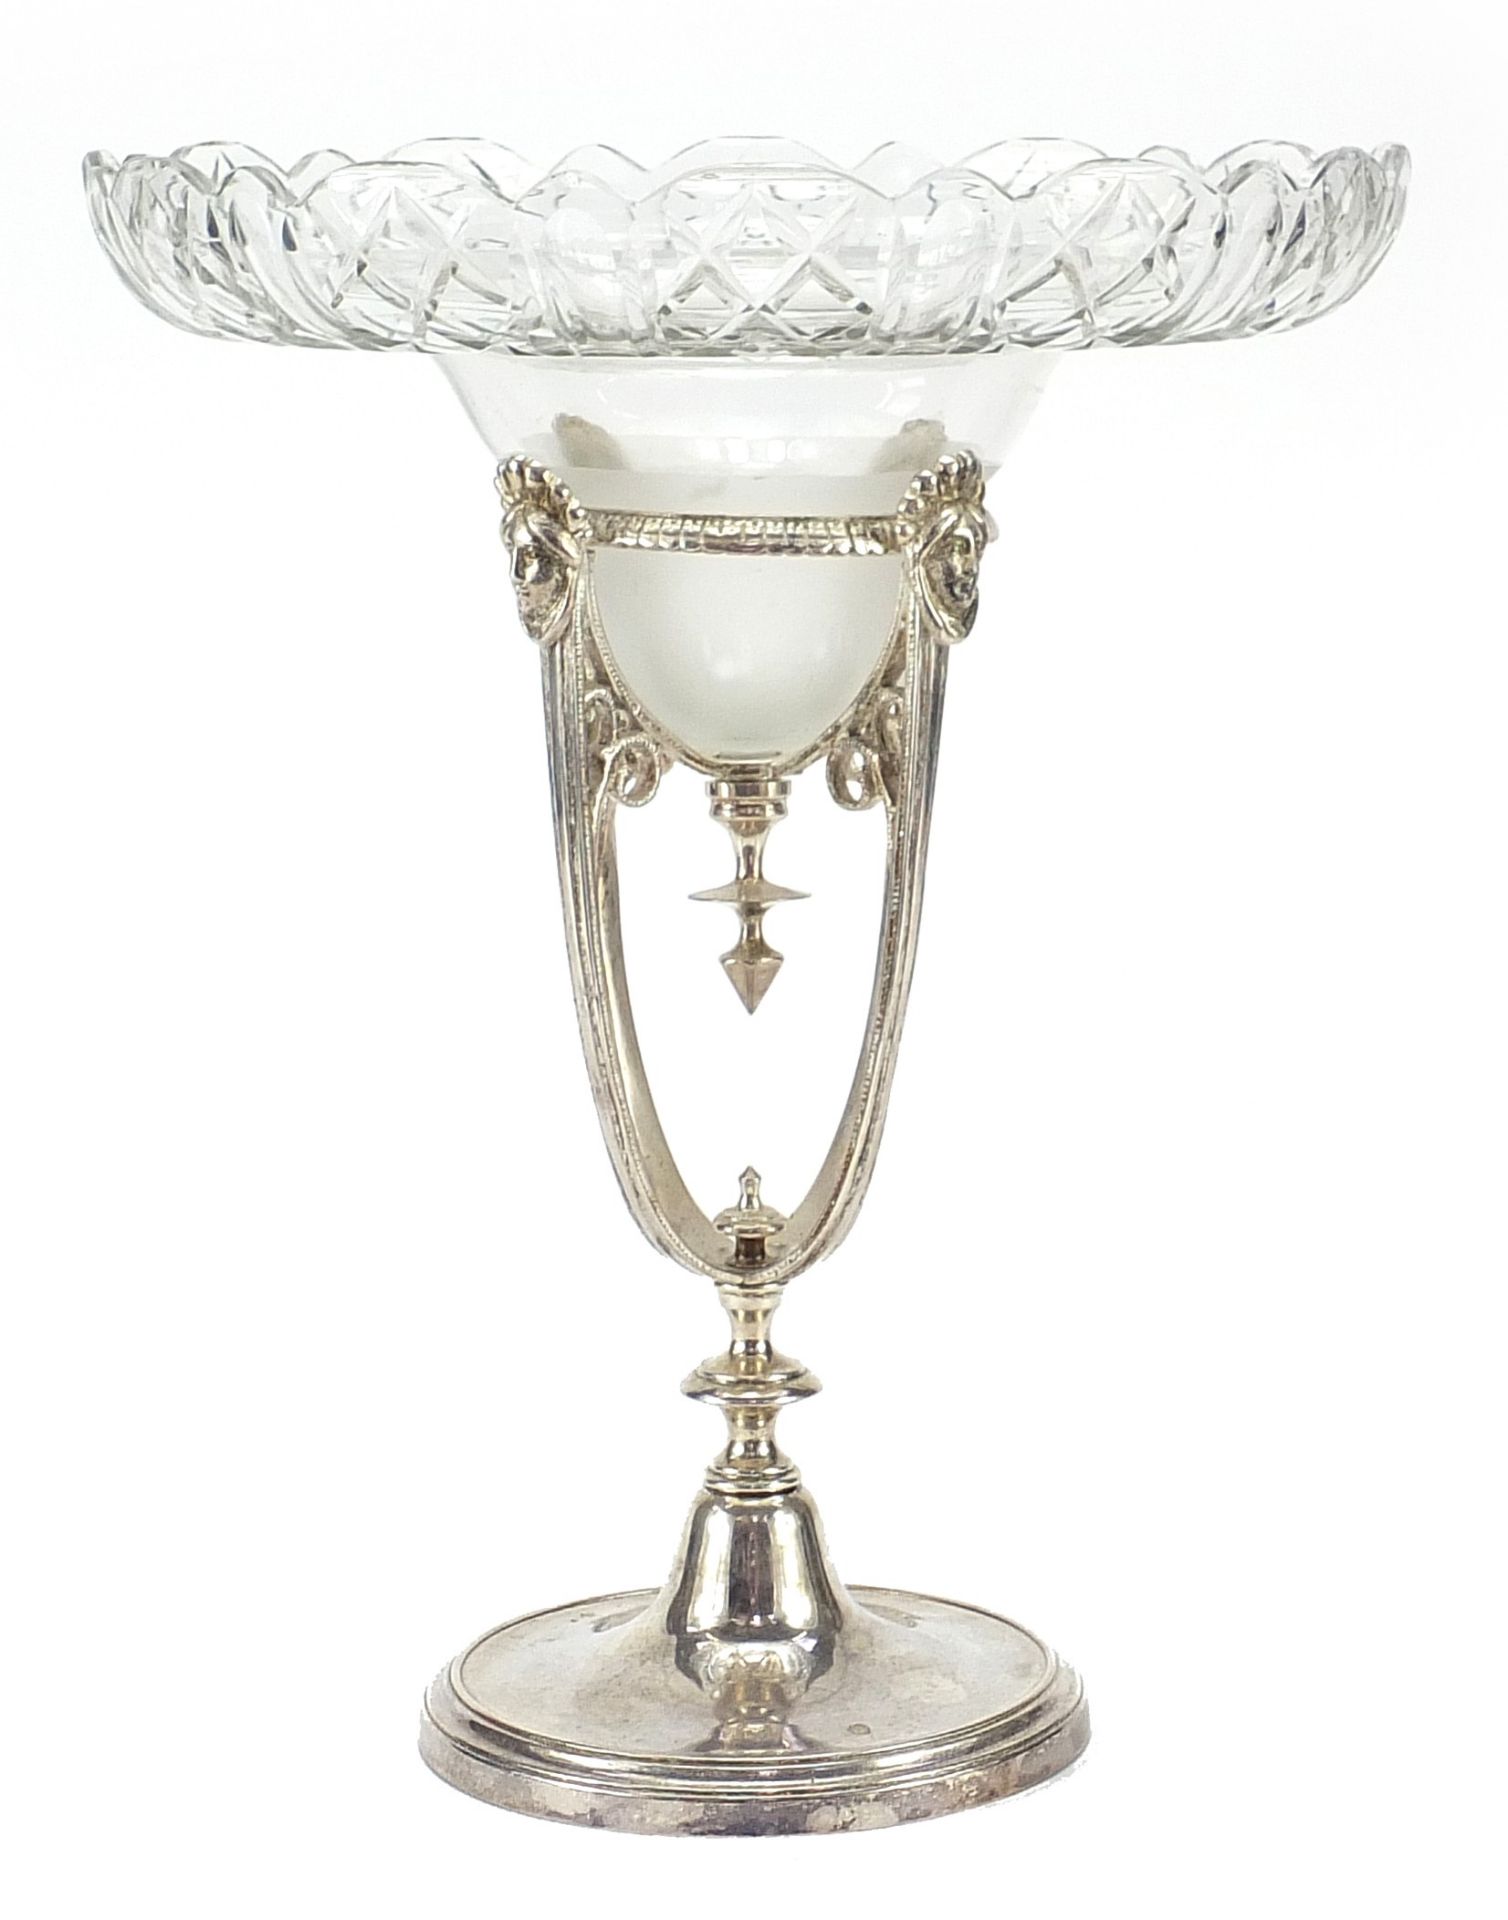 WMF style silver plated centrepiece with cut glass bowl, 36.5cm high